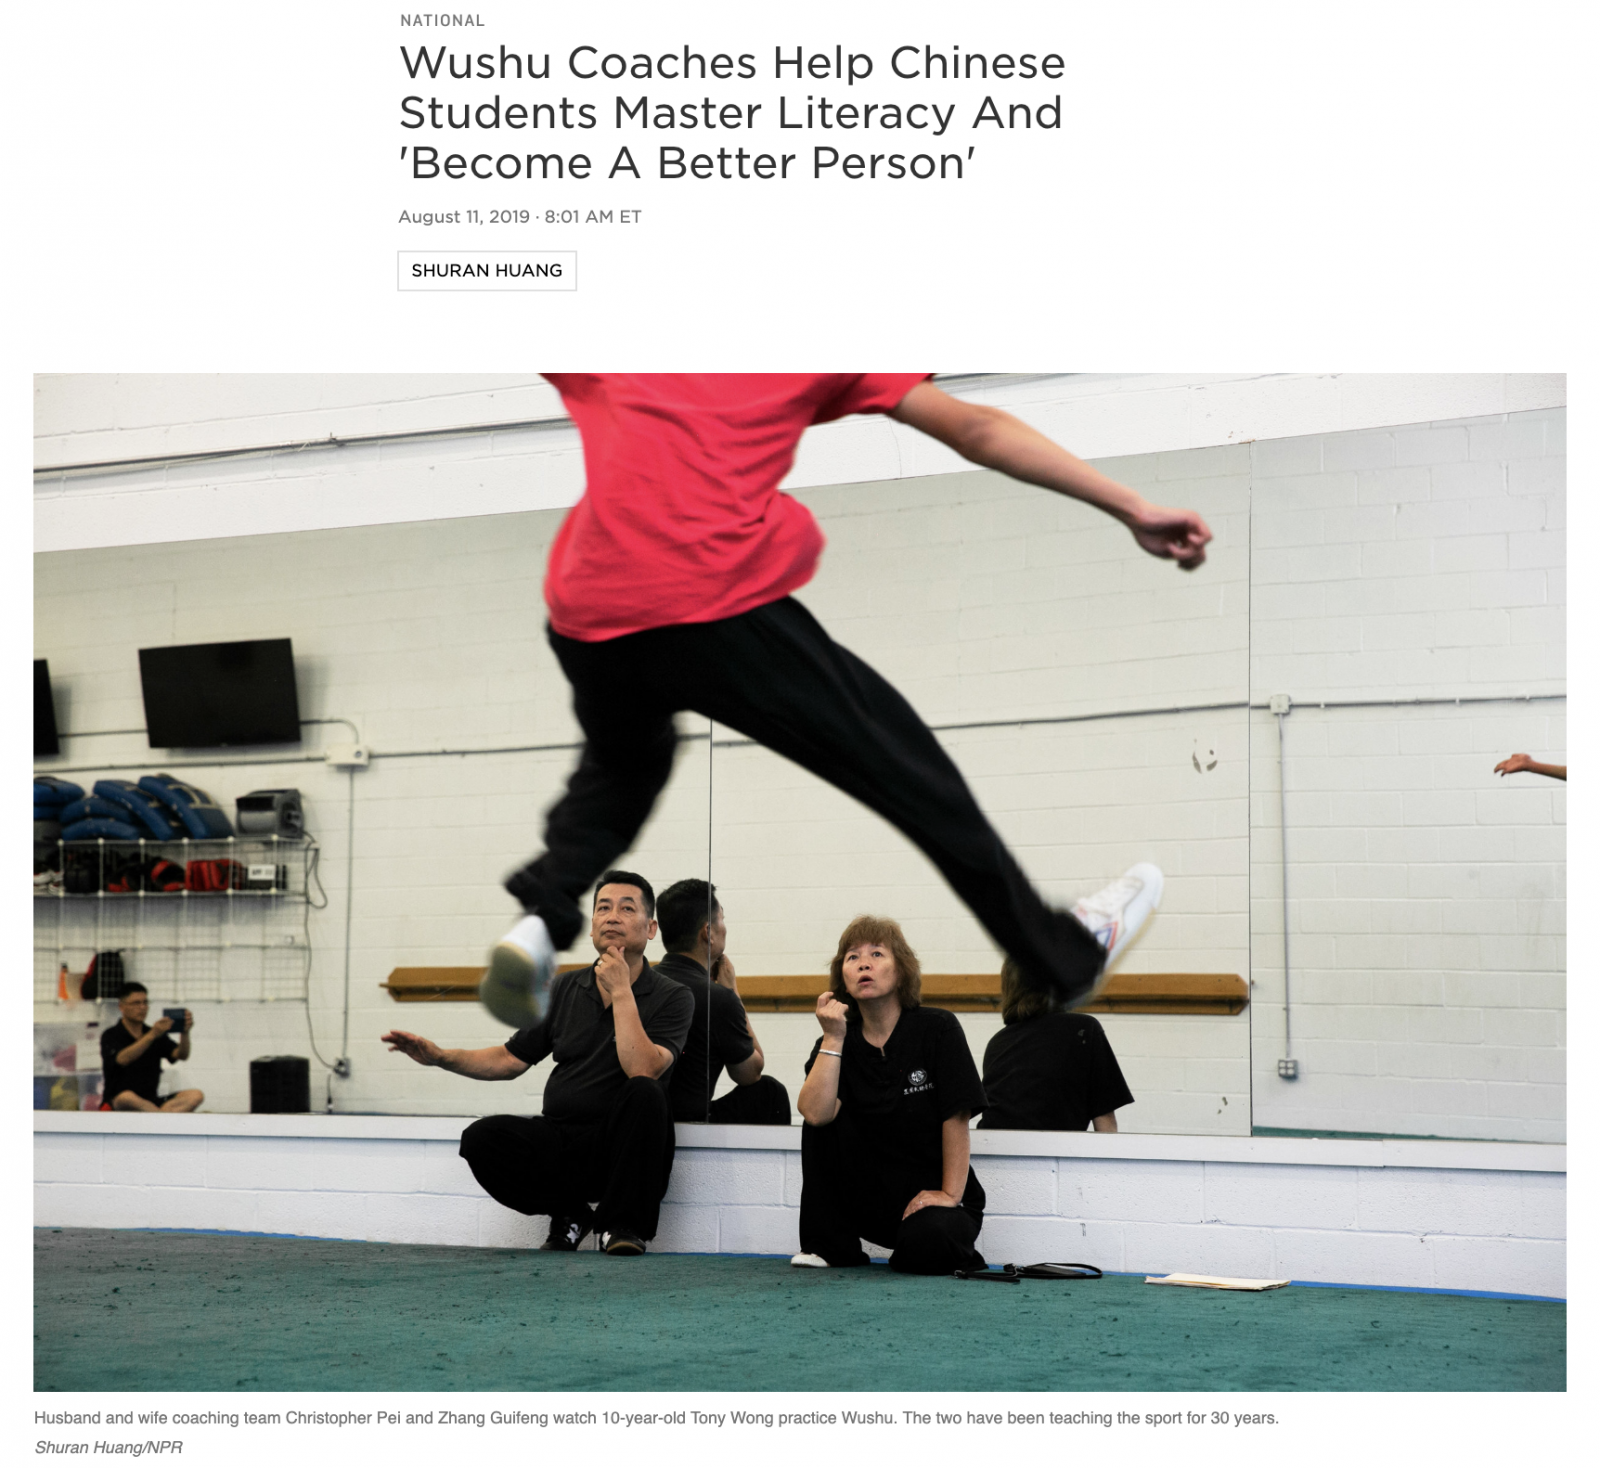 On NPR: Wushu Coaches Help Chinese Students Master Literacy And 'Become A Better Person'